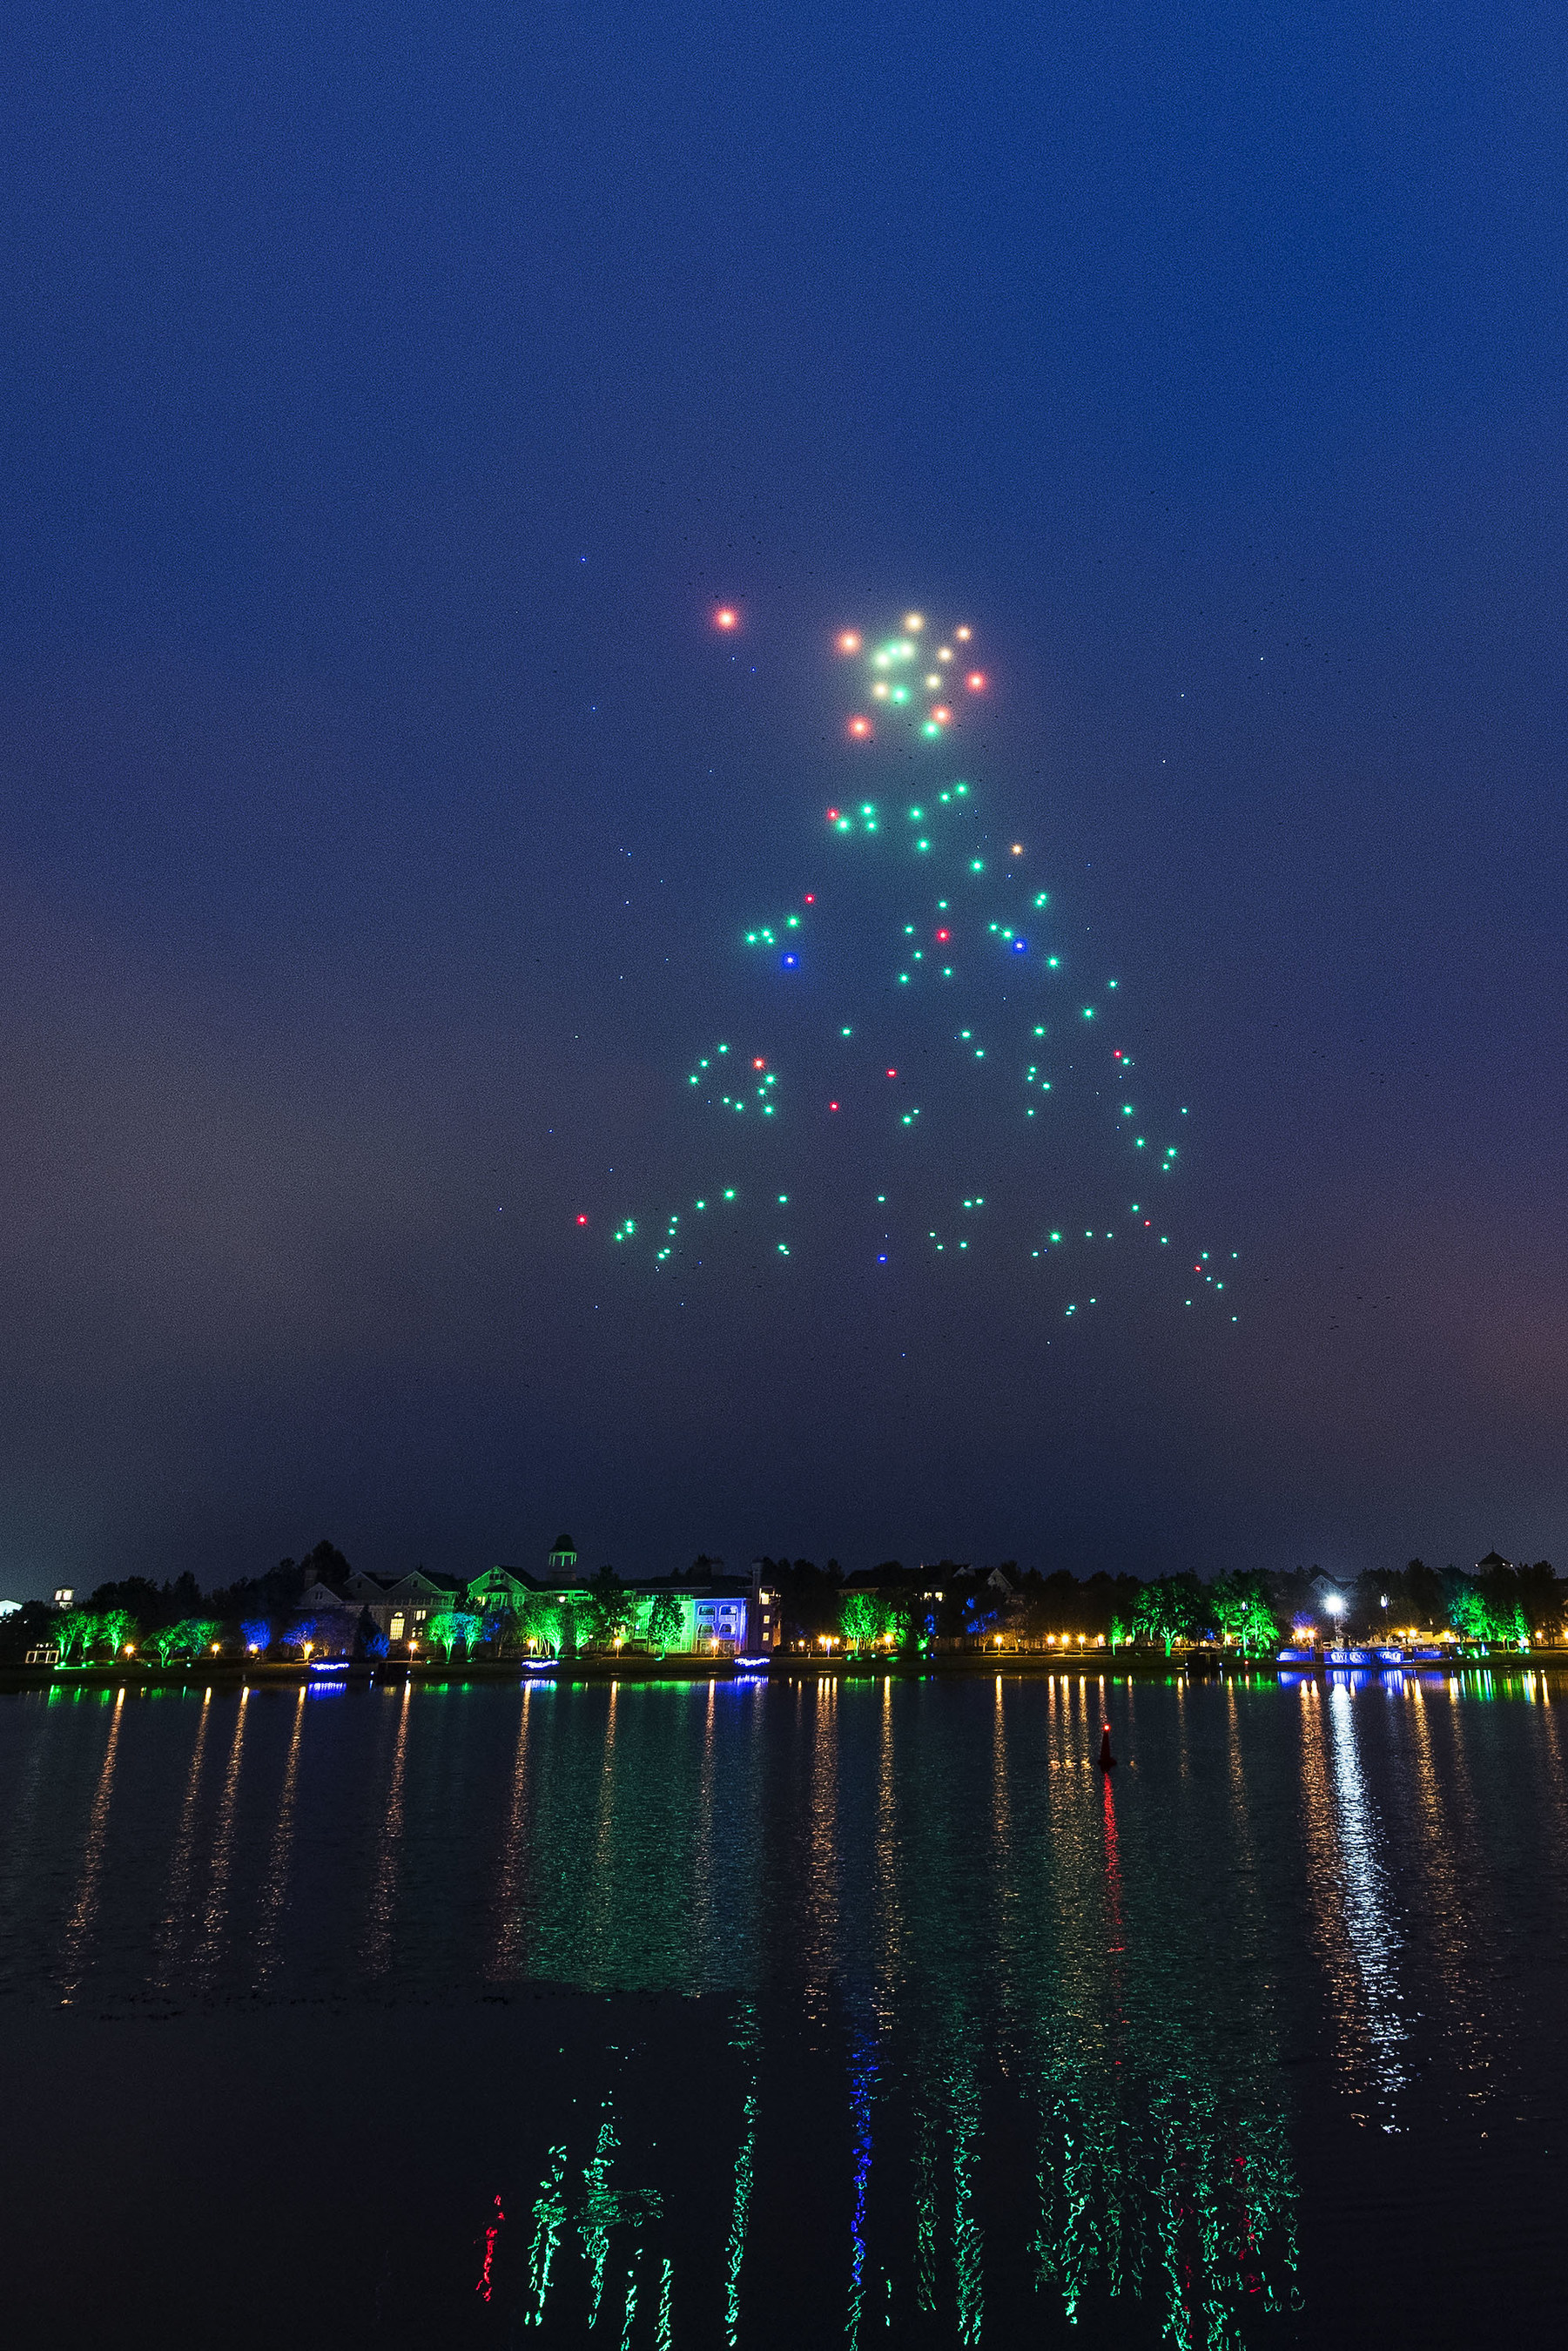 Starbright Holidays - An Intel Collaboration at Disney Spring: This holiday season, guests at Disney Springs-the shopping, dining and entertainment district of Walt Disney World Resort-will get a chance to see Disney and Intel exploring remarkable new technology as hundreds of lighted show drones take to the nighttime sky in "Starbright Holidays - An Intel Collaboration." (Matt Stroshane, photographer)